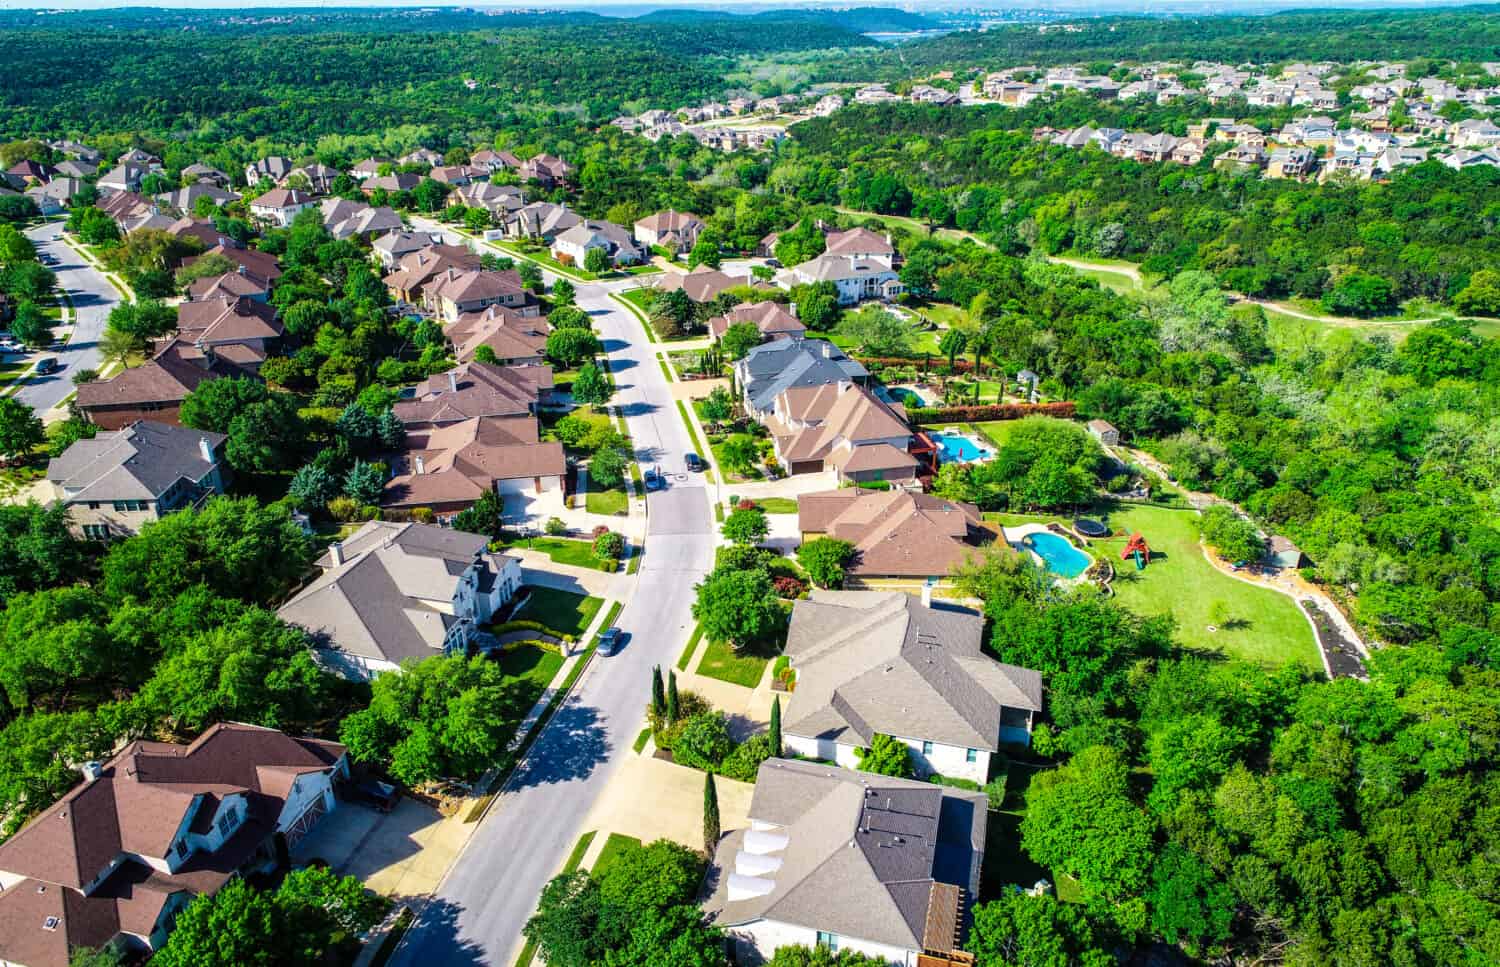 Aerial drone view above Curved road with mansion luxury homes leading into the hills green landscape Cedar Park Texas Suburb